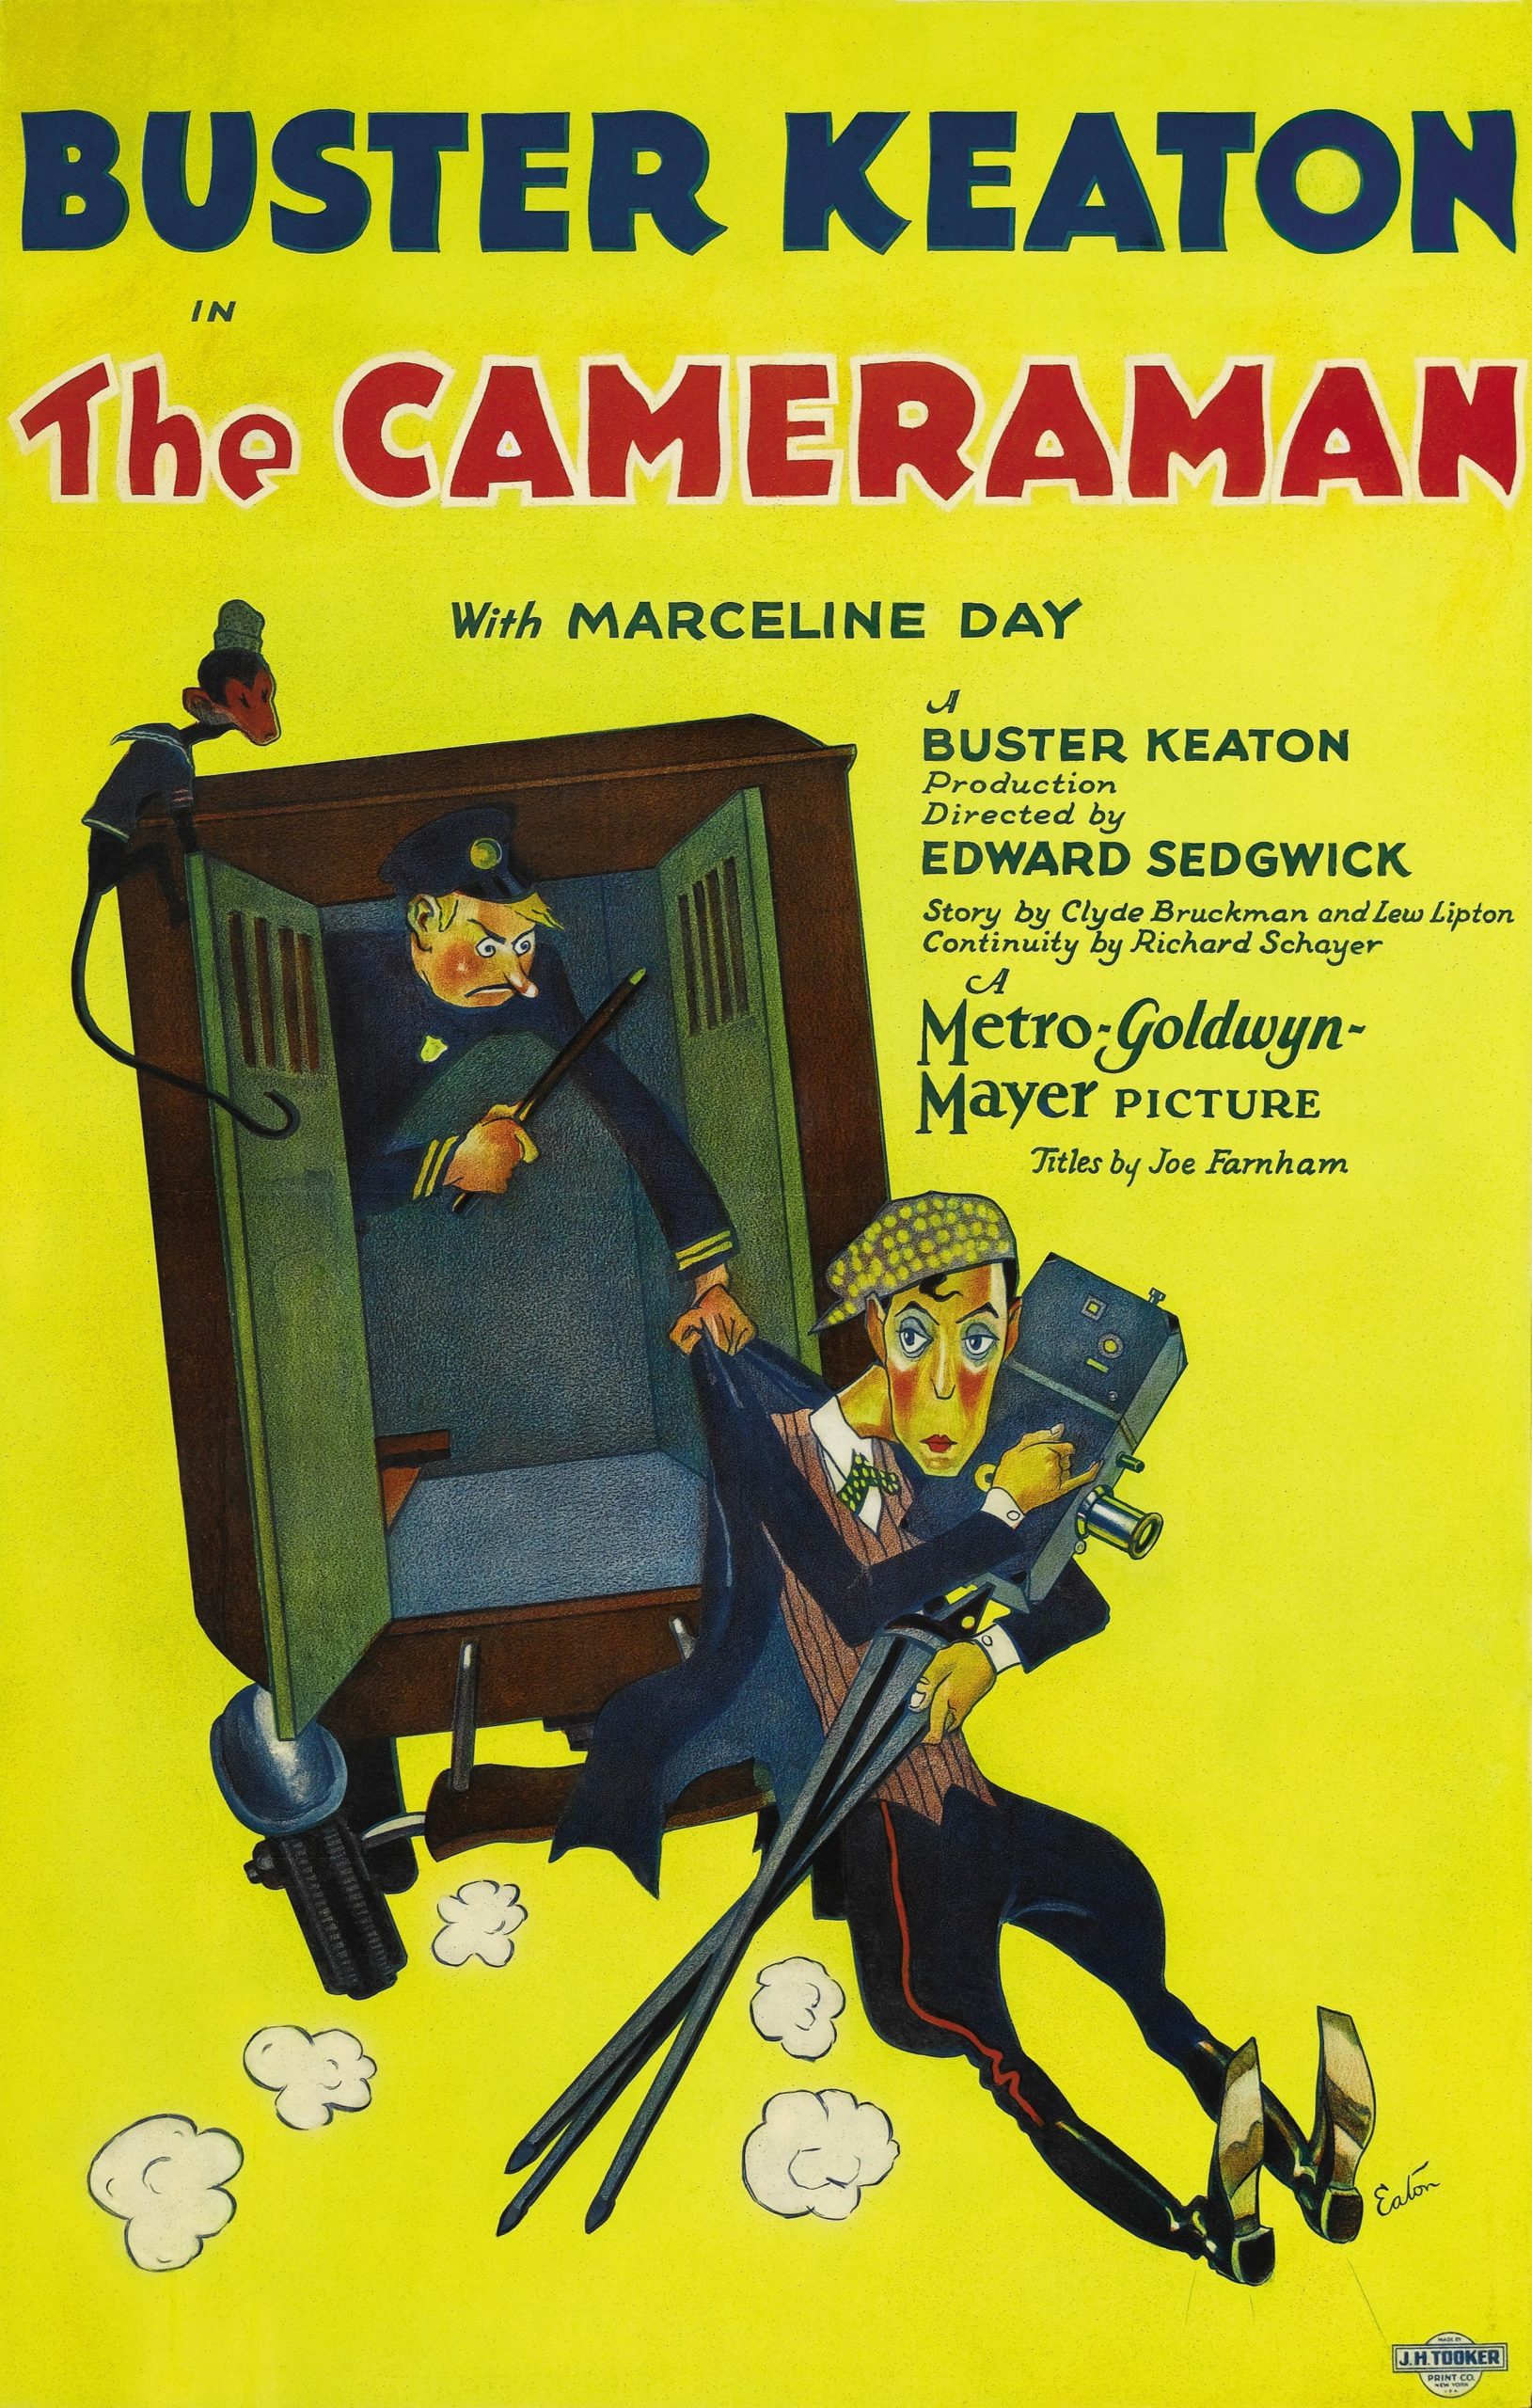 The poster for Buster Keaton's 1928 silent film 